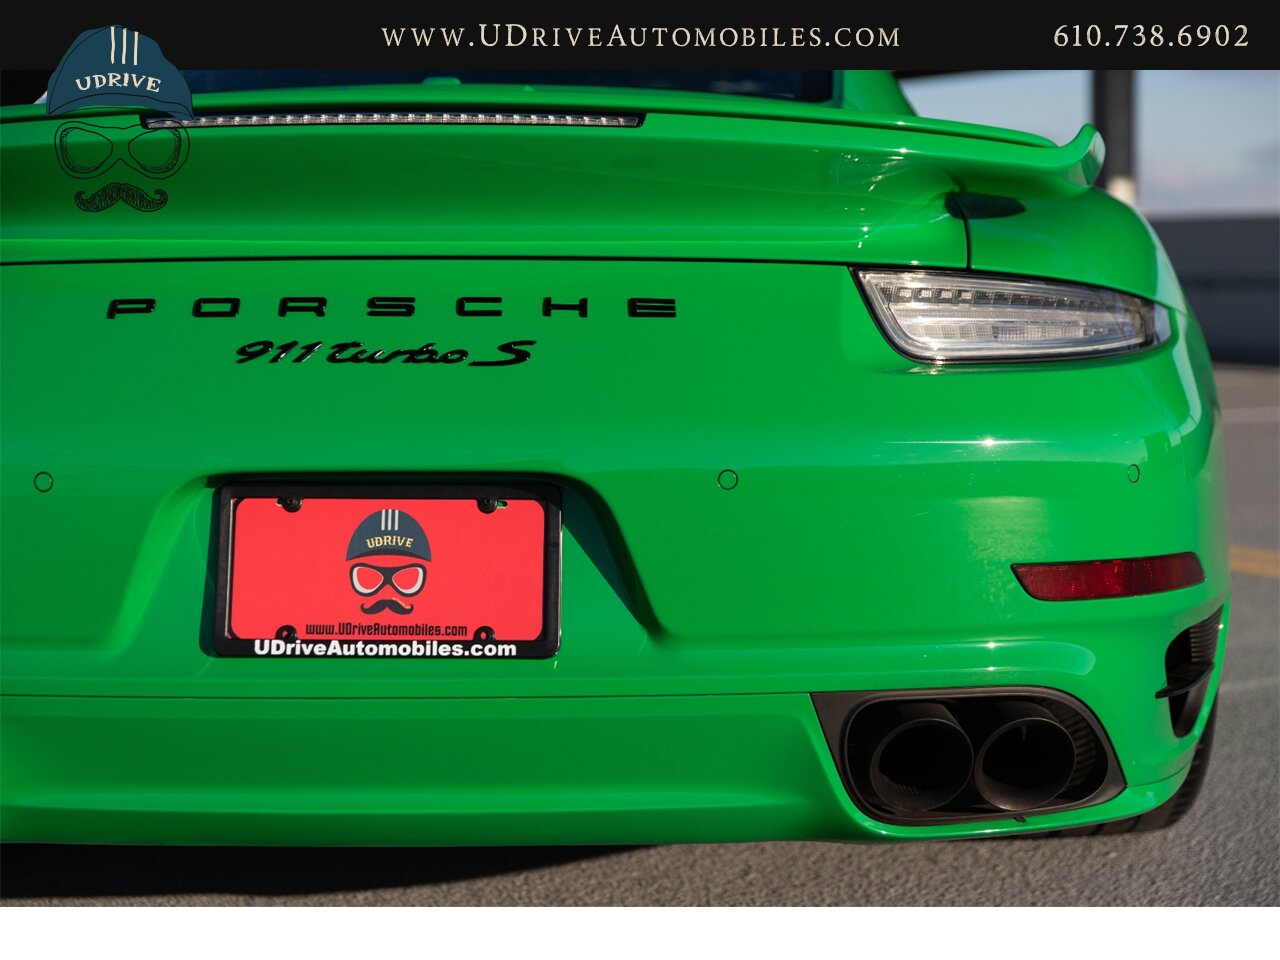 2016 Porsche 911 Turbo S PTS Viper Green Aerokit $203k MSRP  Painted Side Skirts Painted Grilles Wheels in Black - Photo 21 - West Chester, PA 19382